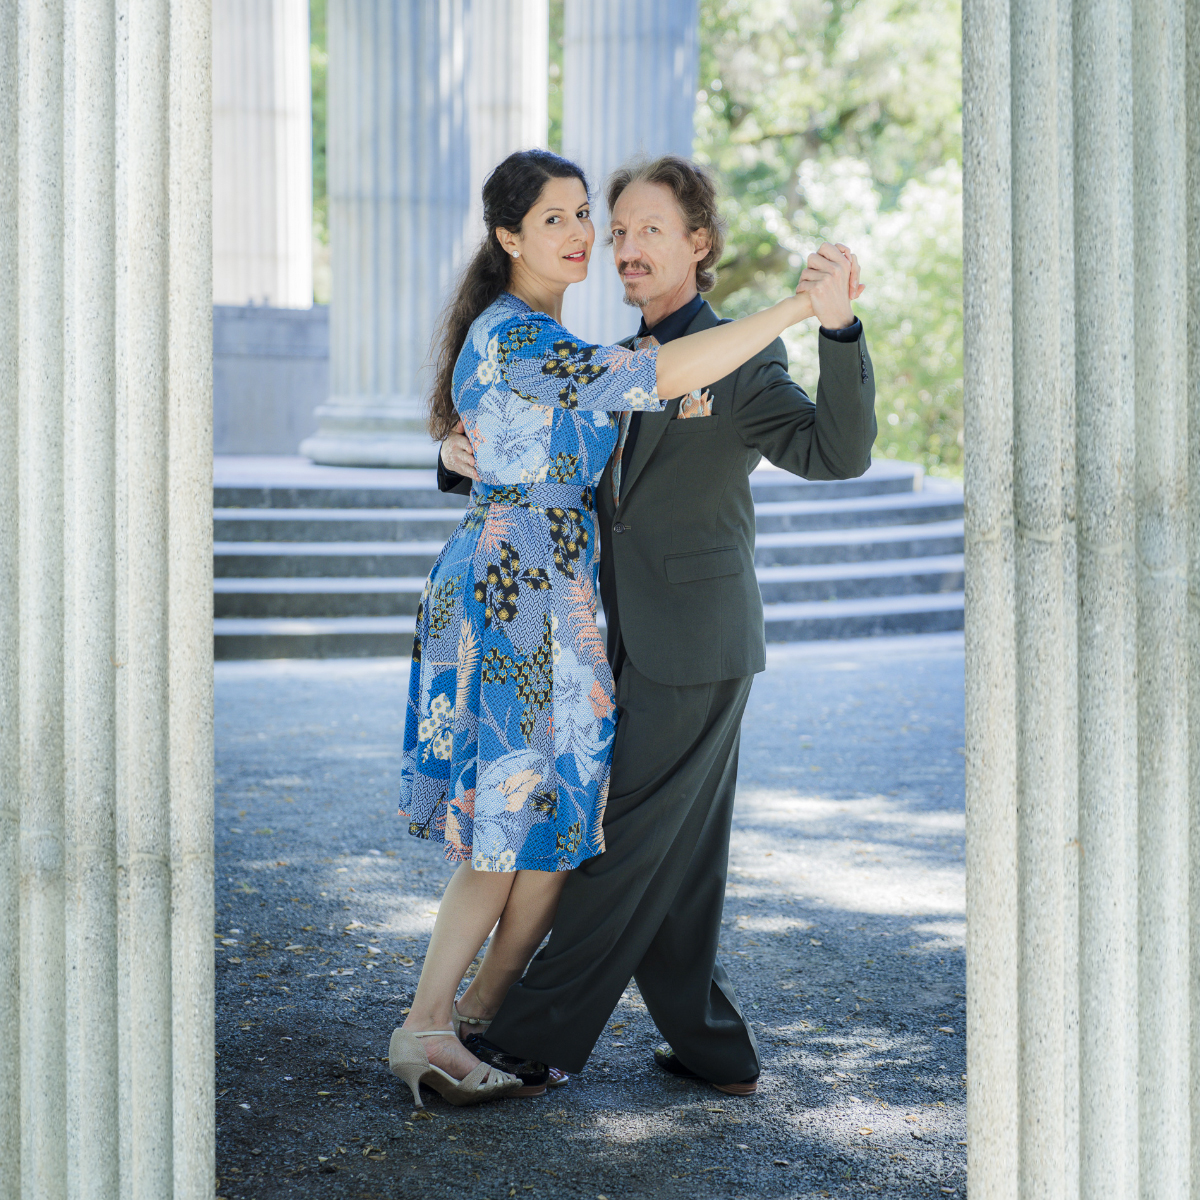 The Essence of Argentine Tango: A Journey of Self-Discovery and Community Celebration